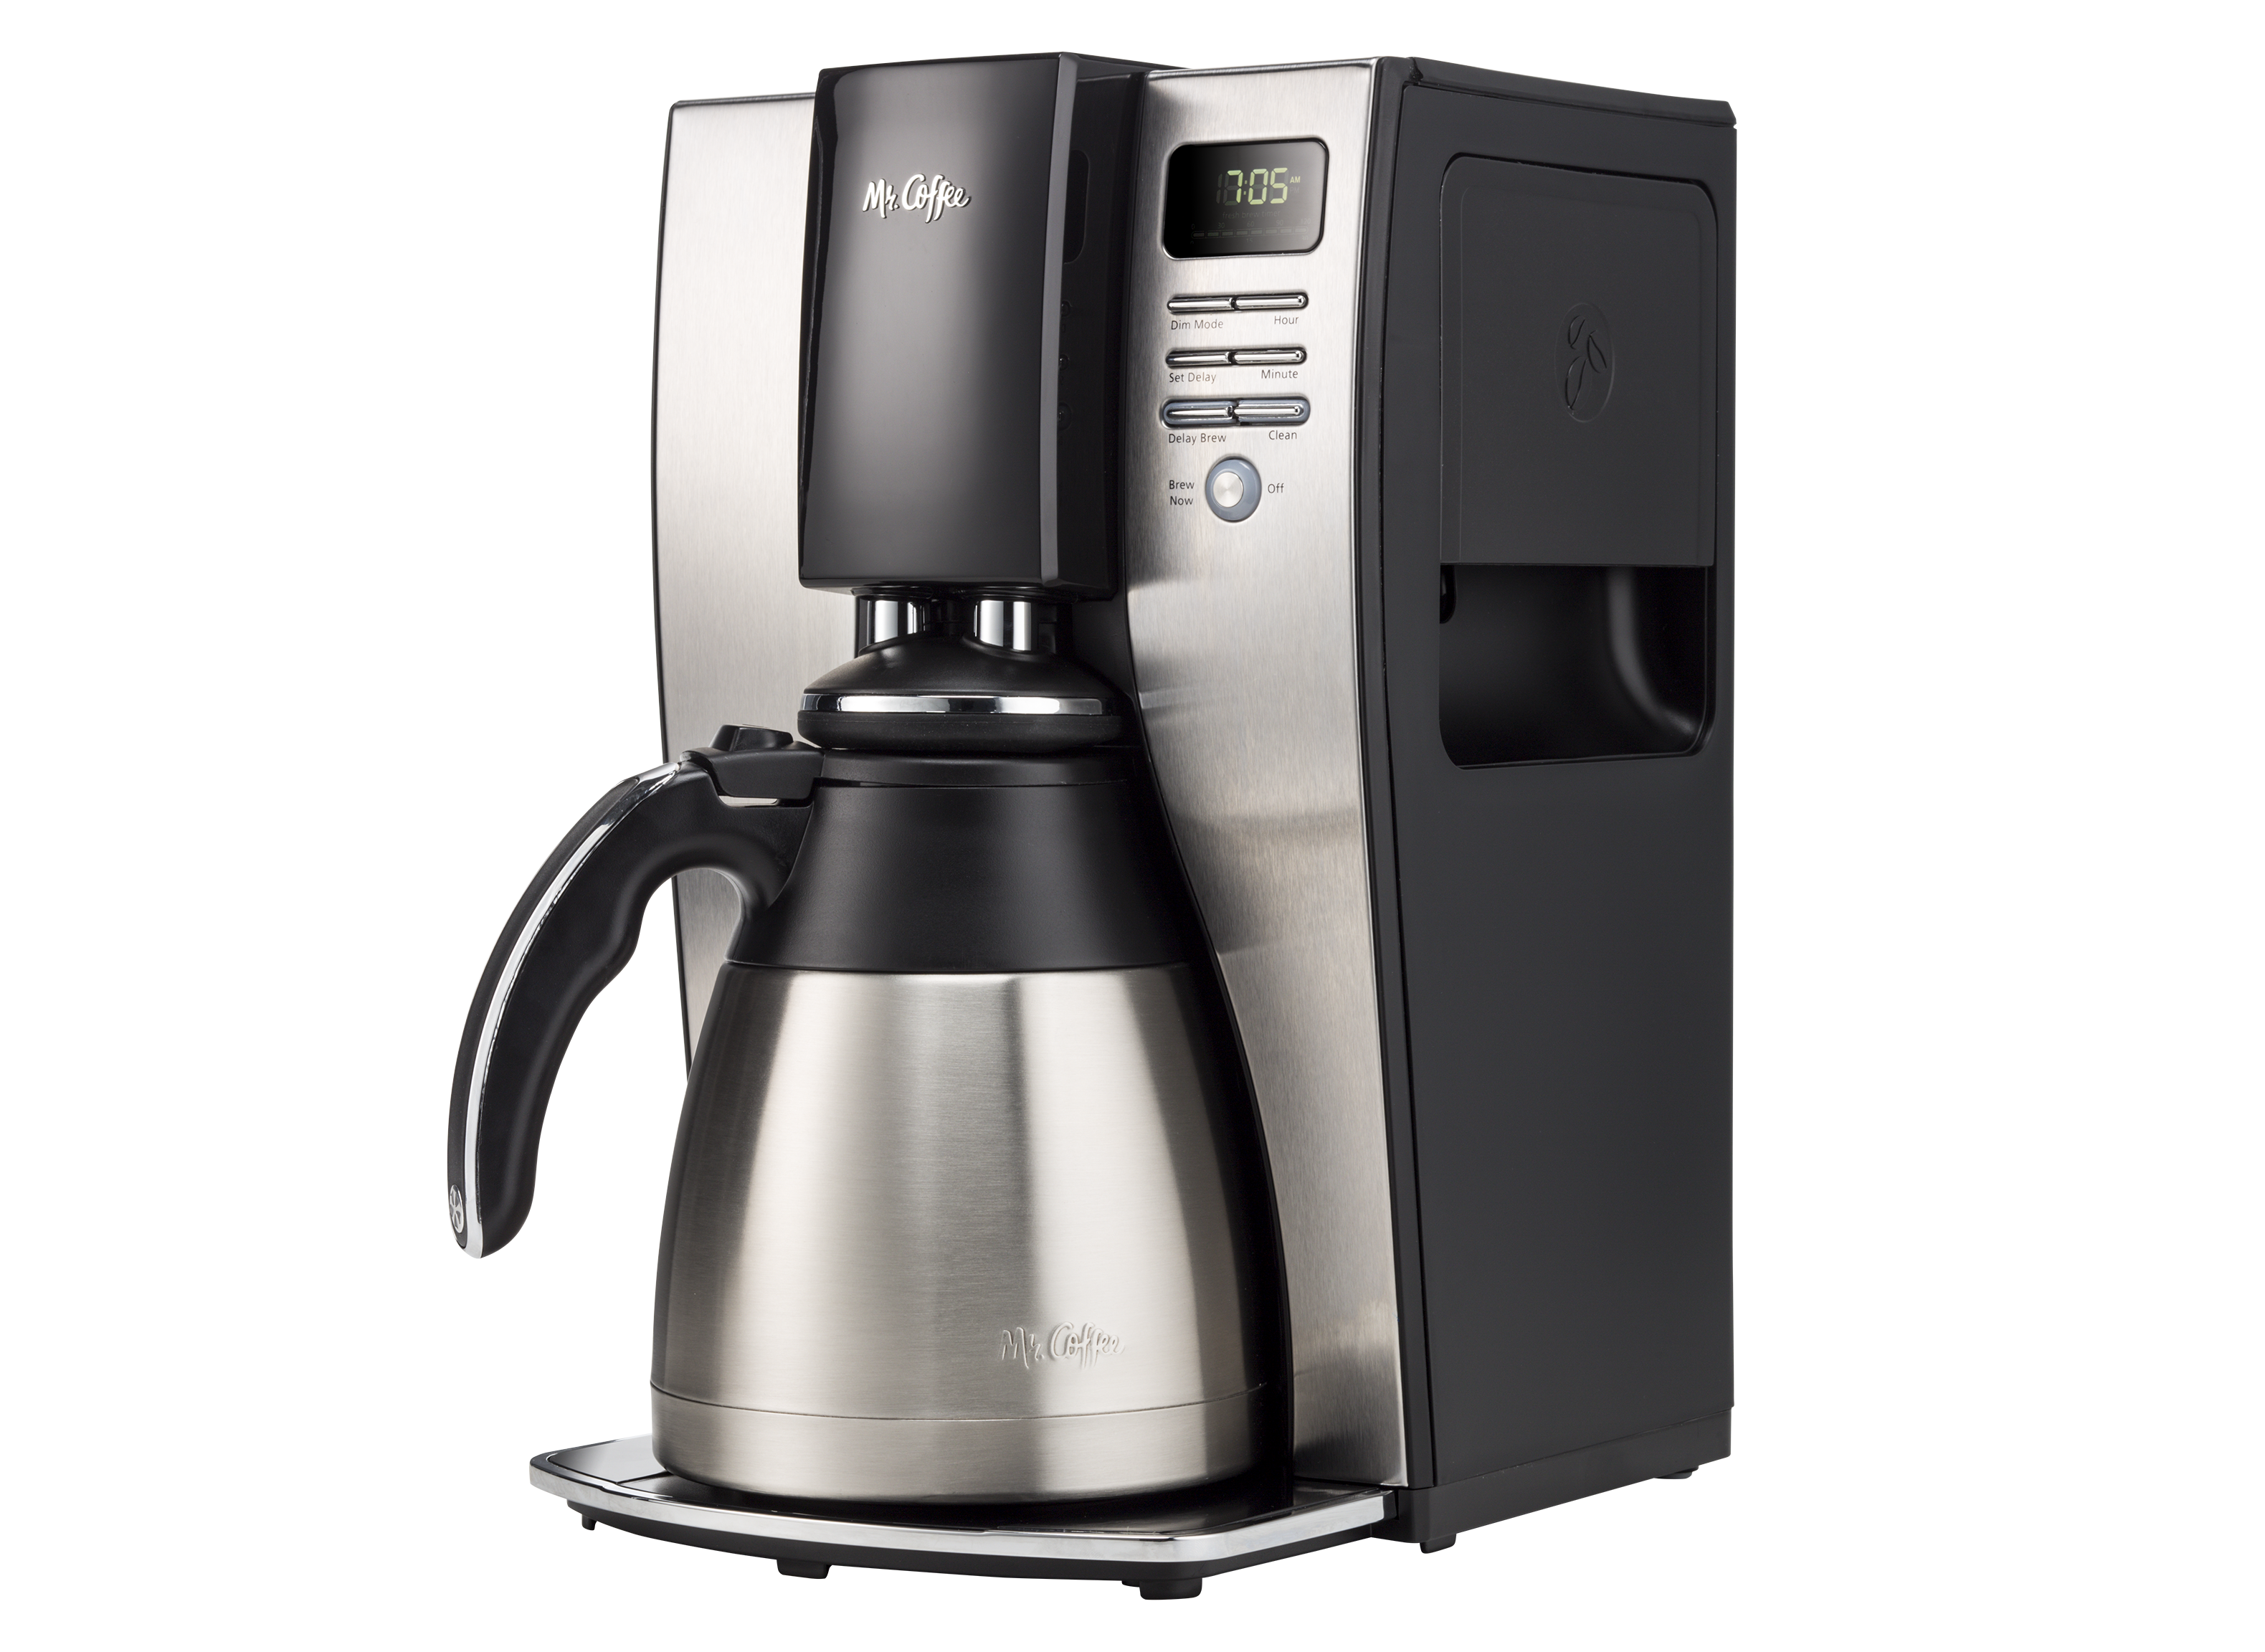 https://crdms.images.consumerreports.org/prod/products/cr/models/114925-coffeemakers-mrcoffee-optimalbrewbvmcpstx91.png